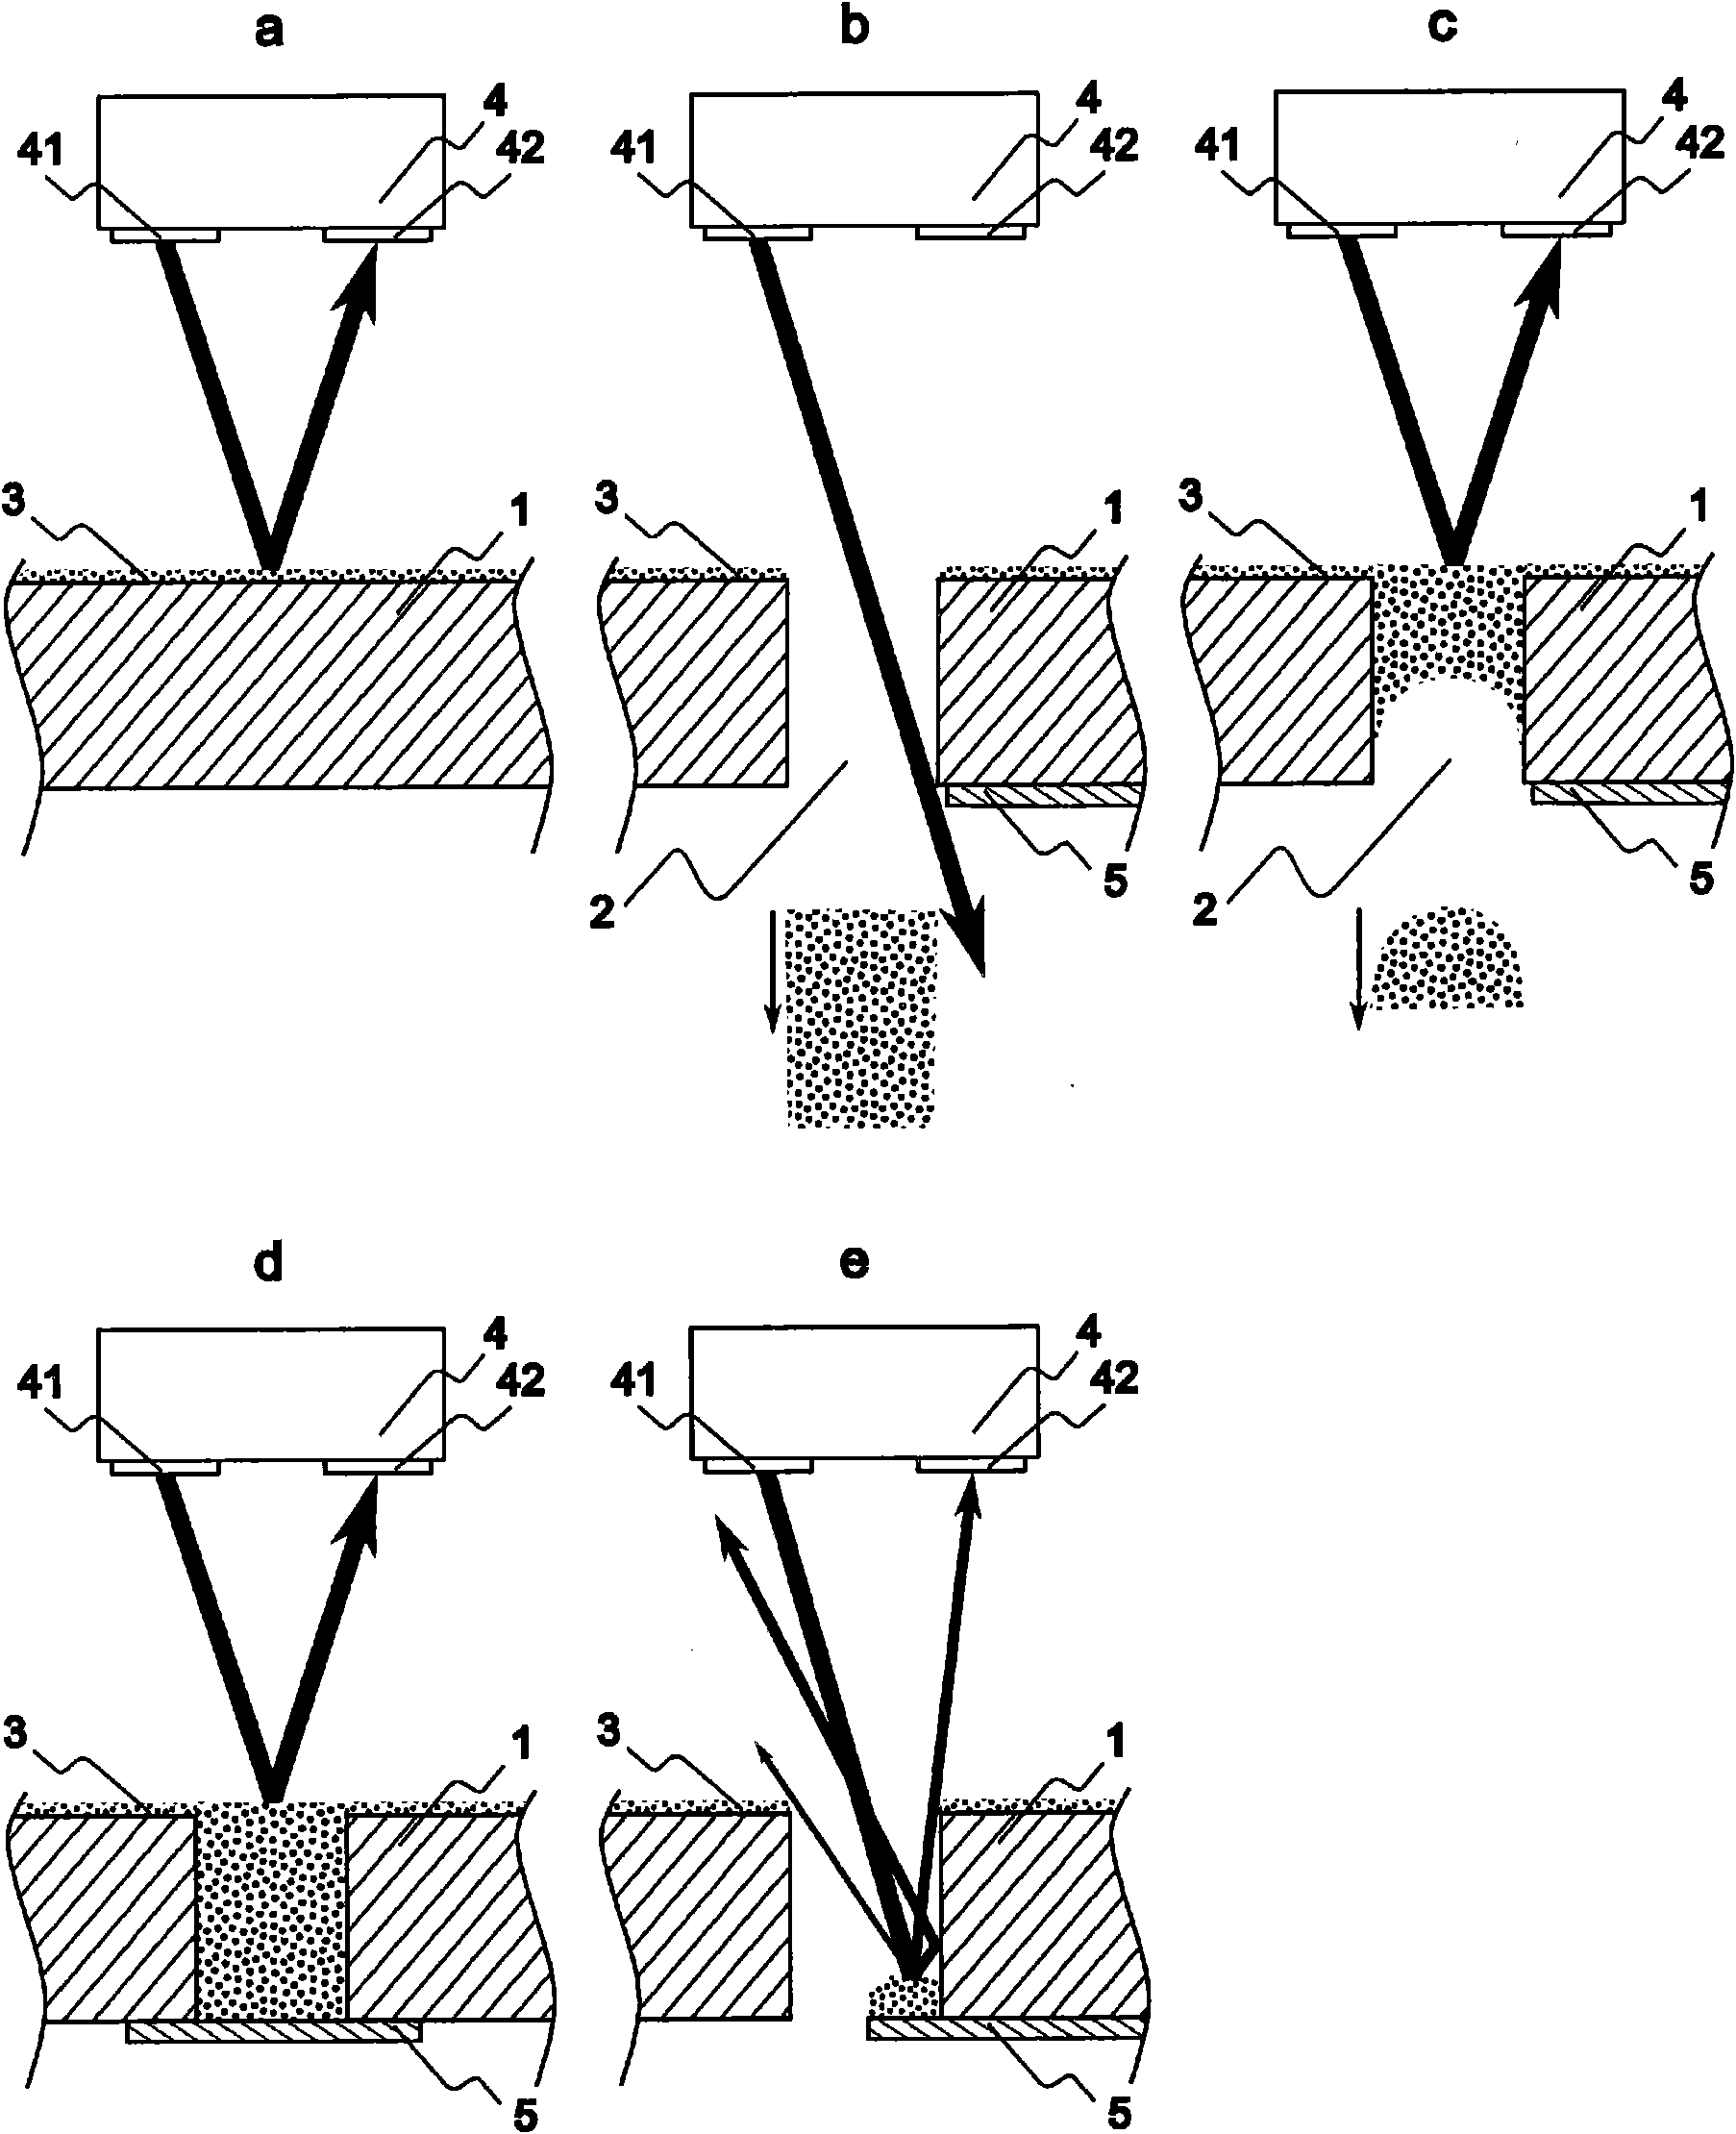 Powder feeder, powder filling and packaging machine, and method of manufacturing powder package